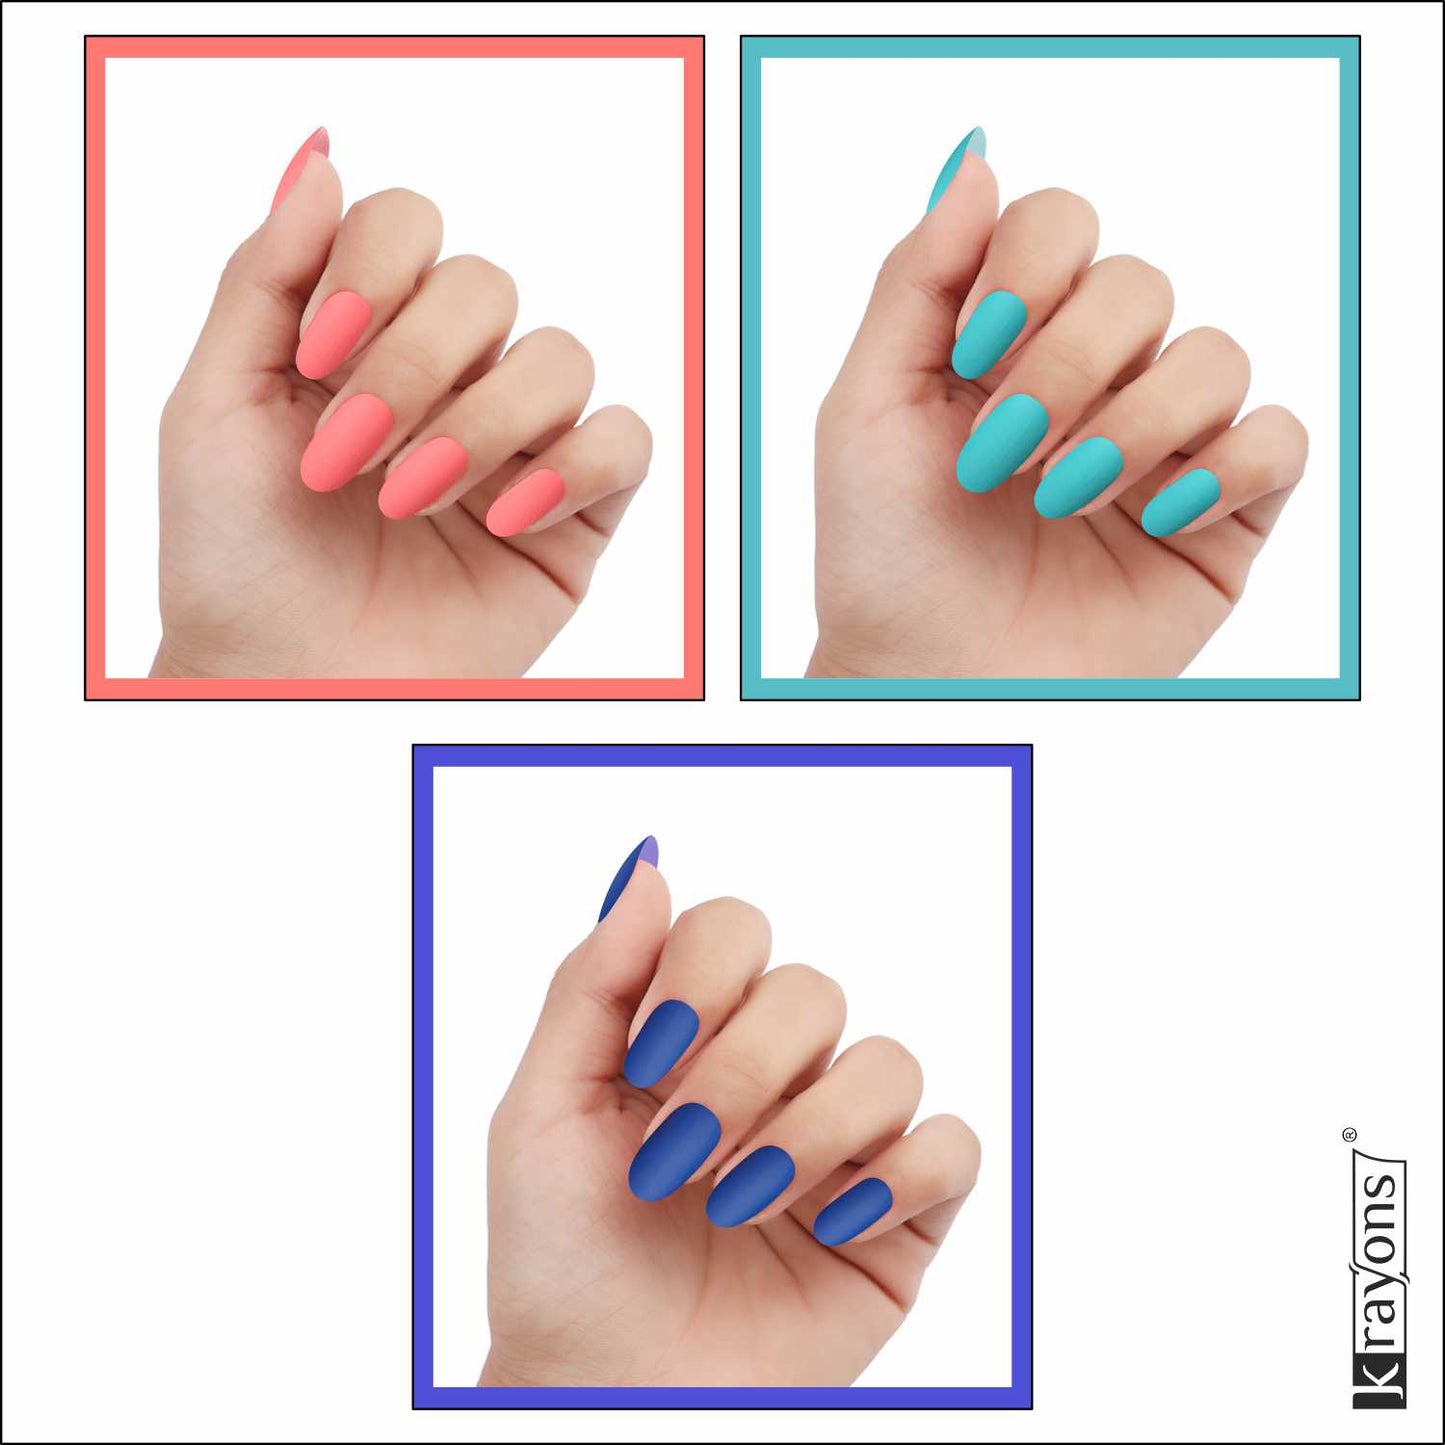 Krayons Cute Super Matte Finish Nail Enamel, Quick Dry, LongLasting, Blossom Peach, Cyan Matte, Blue Ink, 6ml Each (Pack of 3)